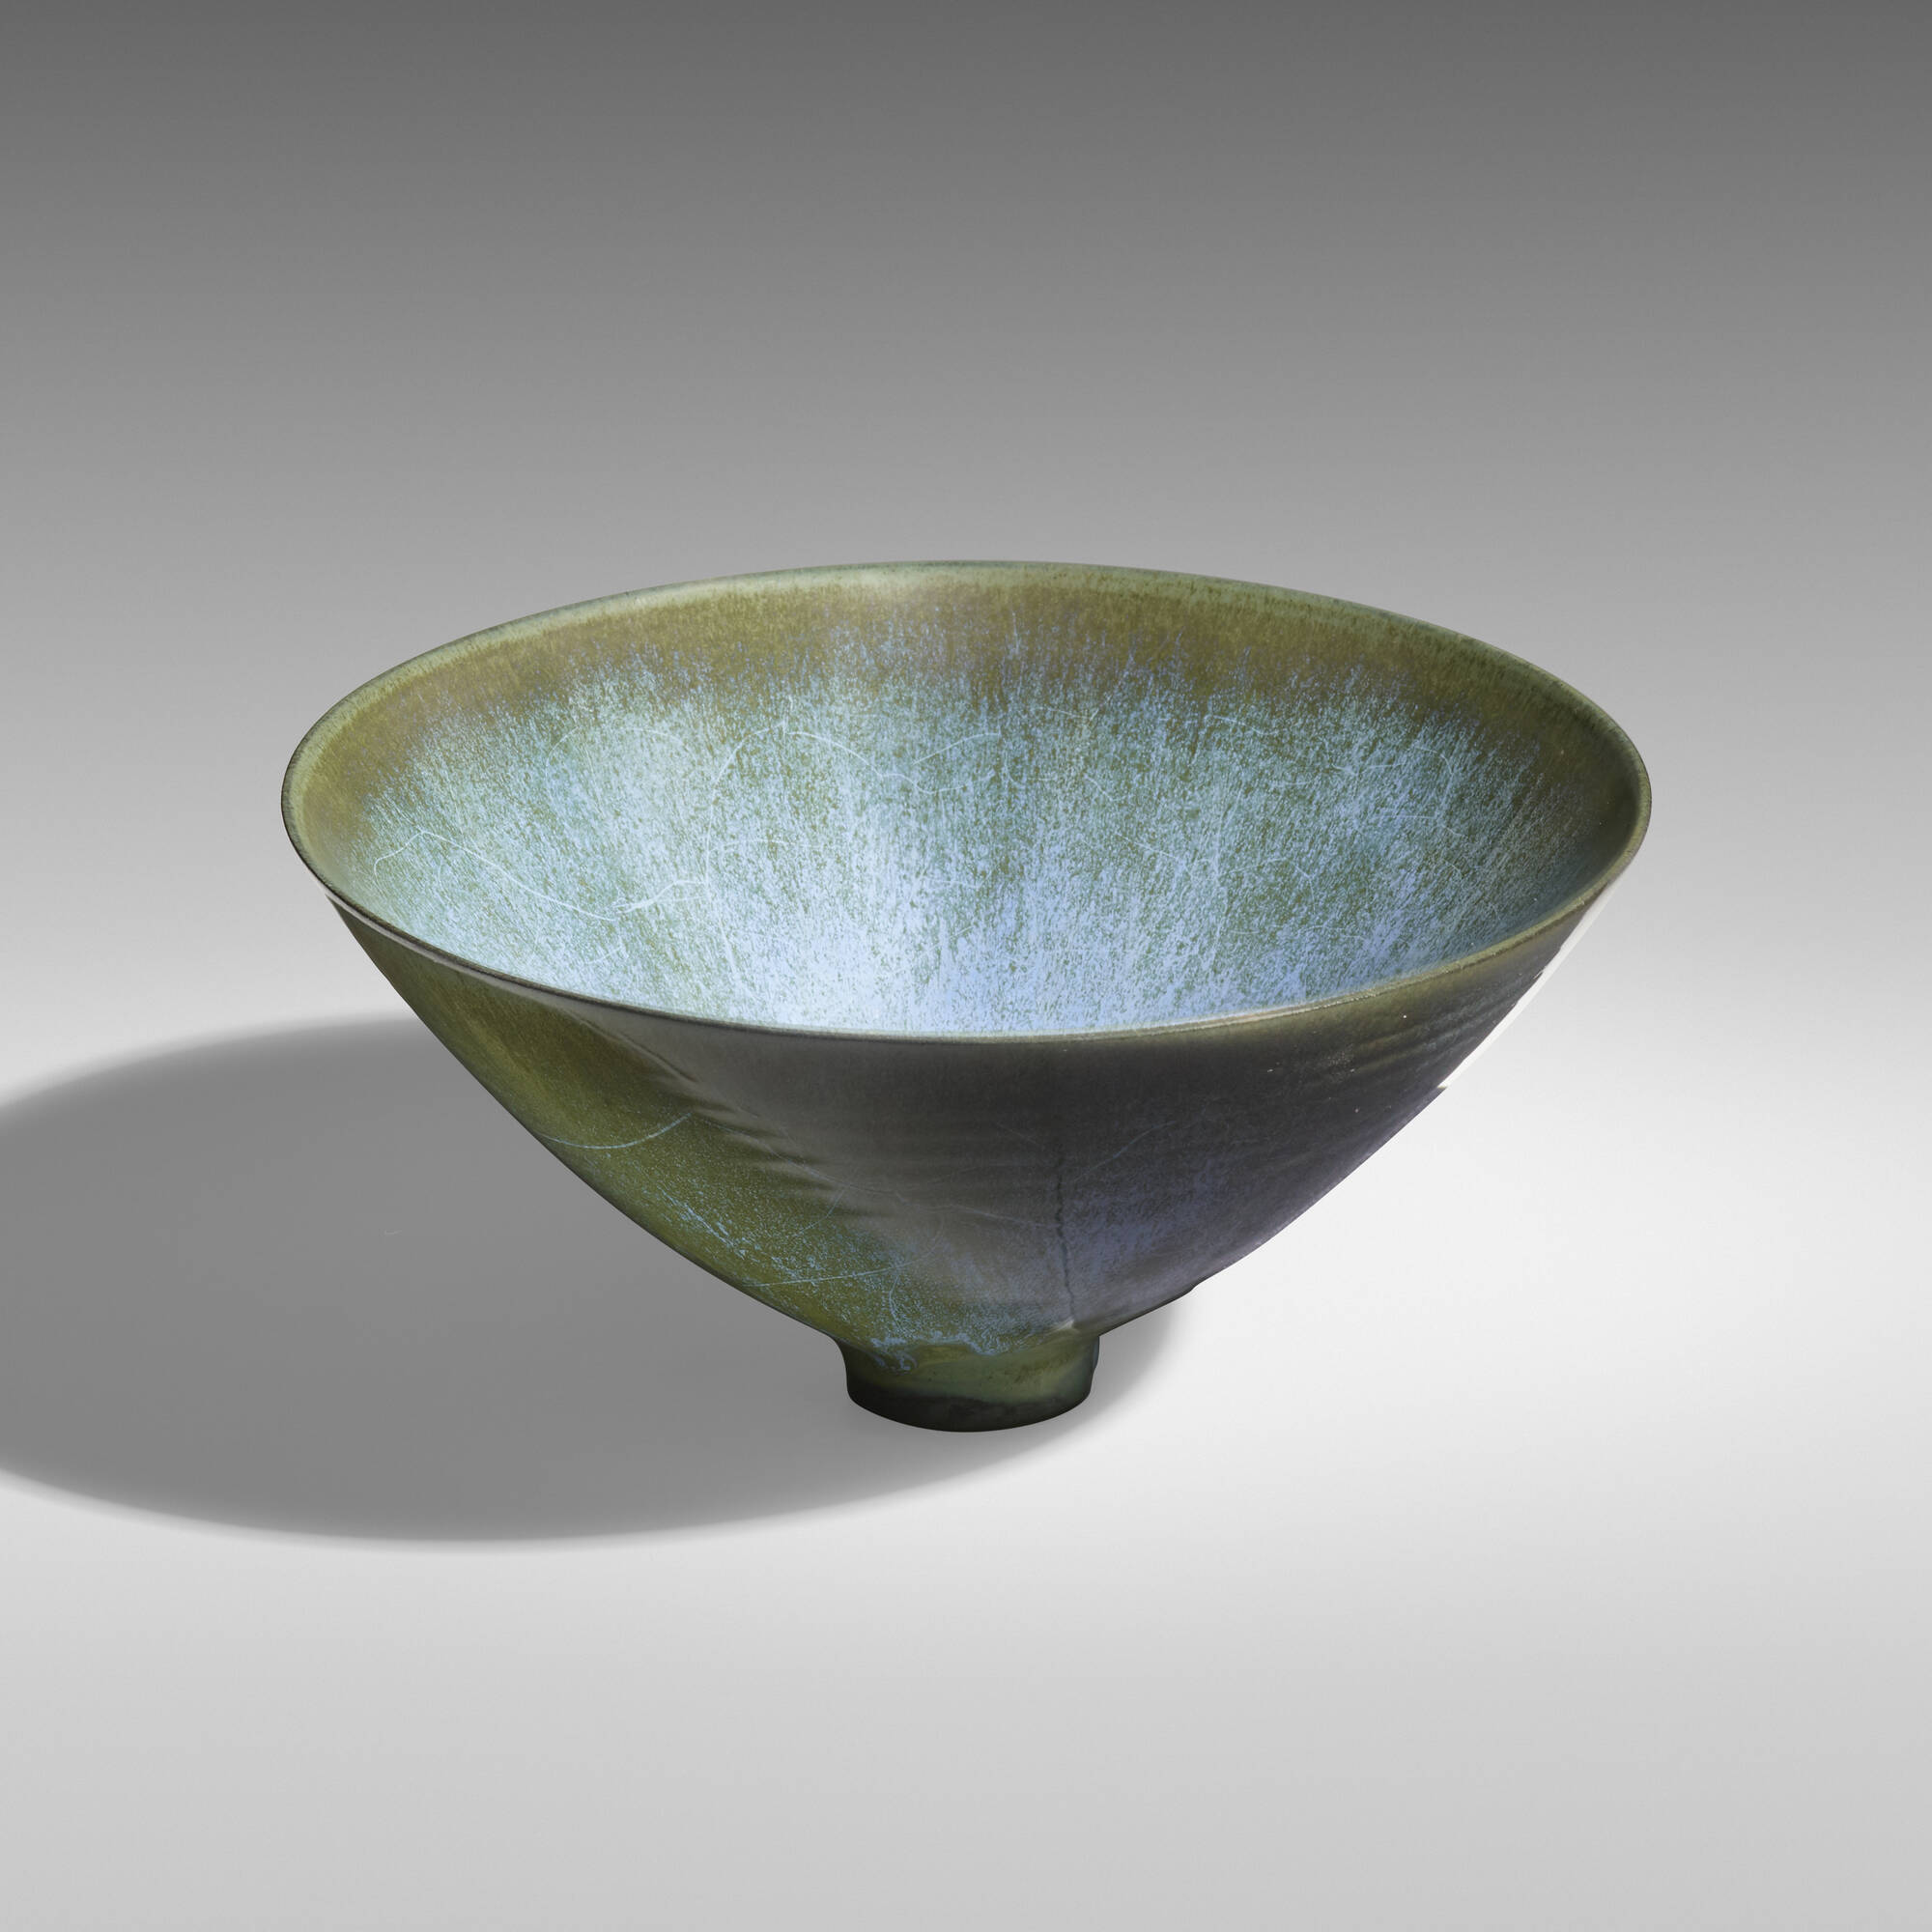 https://www.ragoarts.com/items/index/2000/580_1_modern_design_january_2022_gertrud_and_otto_natzler_conical_bowl_with_base__rago_auction.jpg?t=1693162415